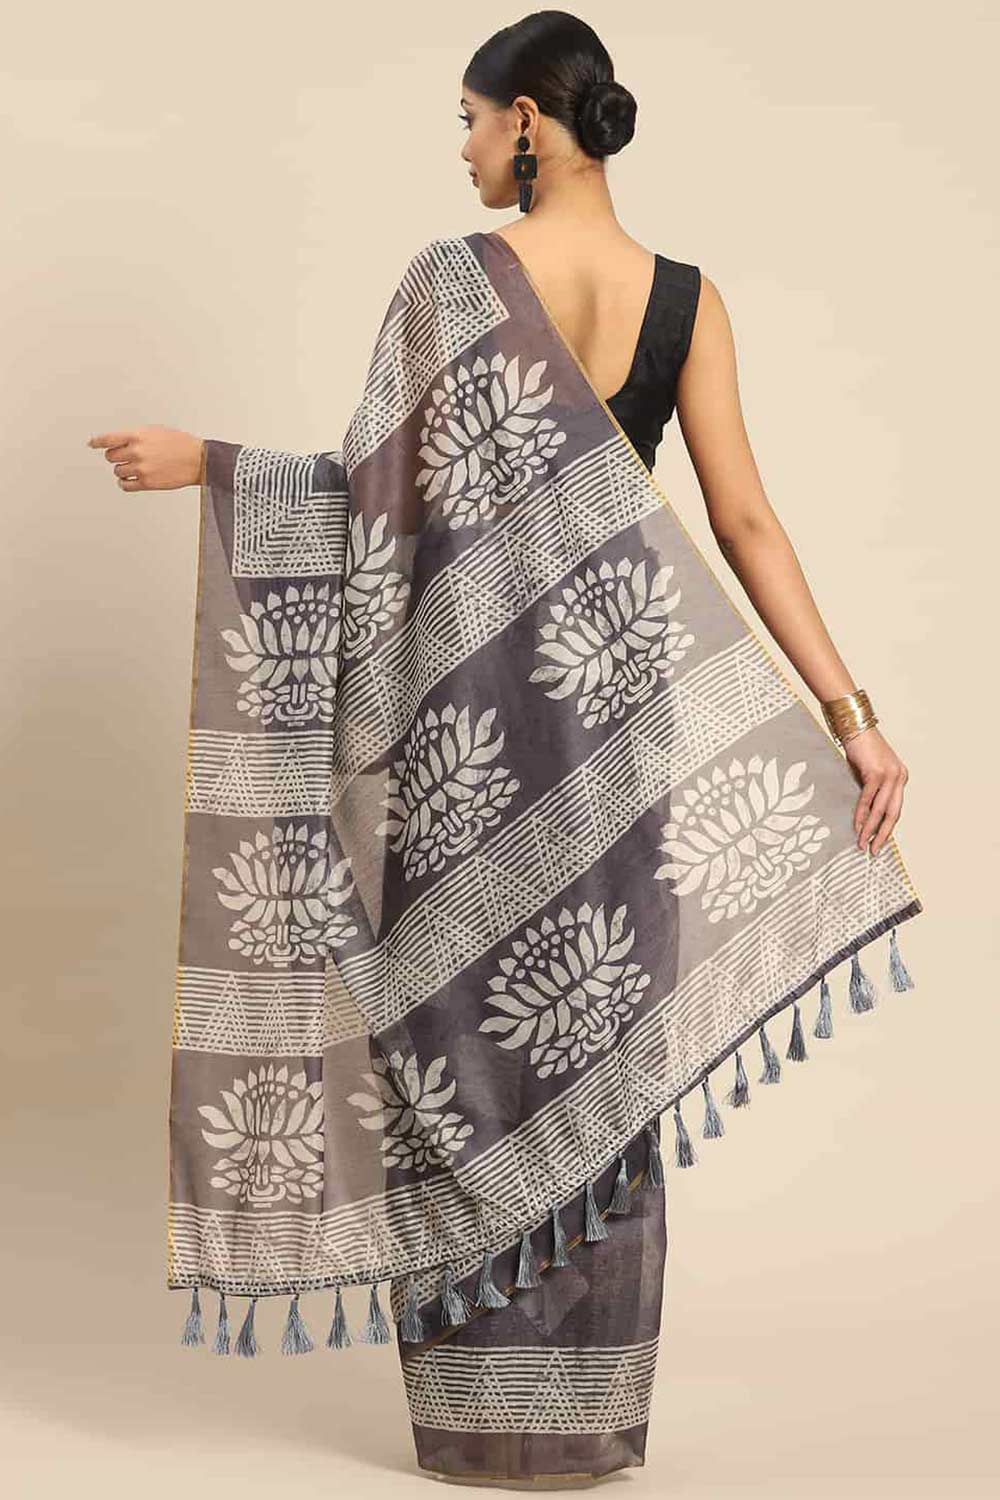 Shop Gora Black Cotton Block Printed One Minute Saree at best offer at our  Store - One Minute Saree